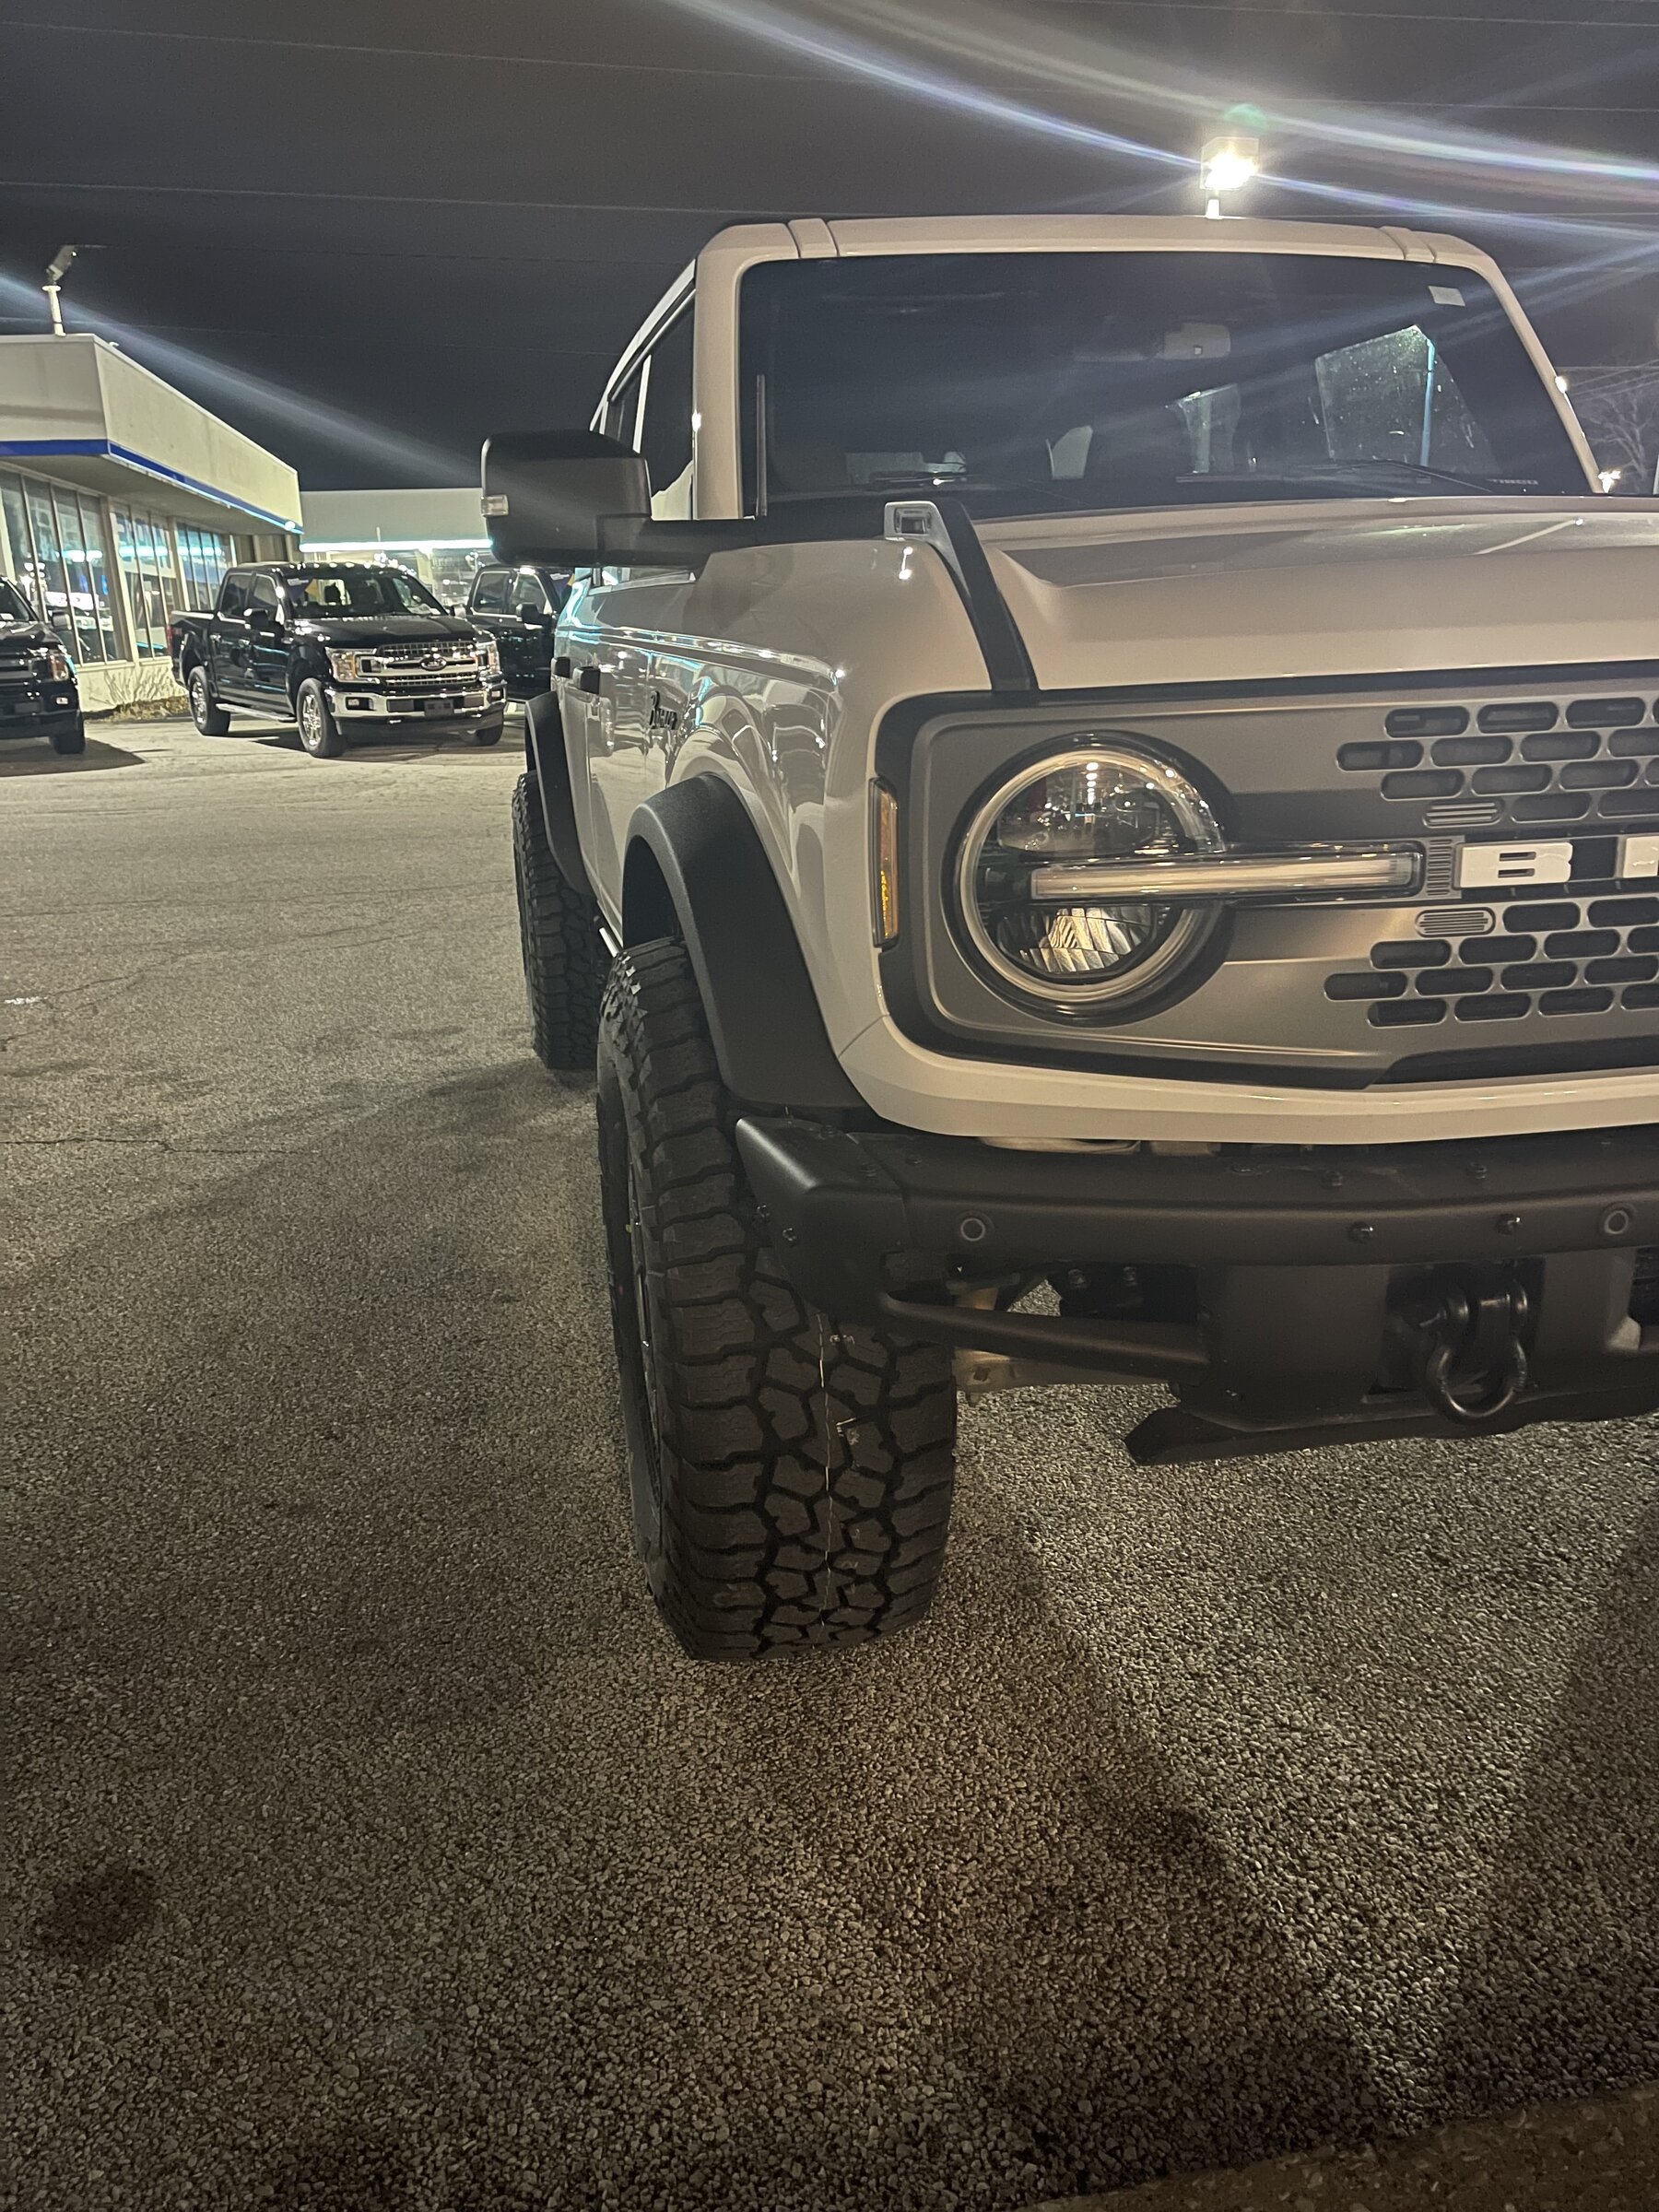 Ford Bronco Betty got some new shoes! FEE38477-1FEE-440B-AF6D-DC232F273262